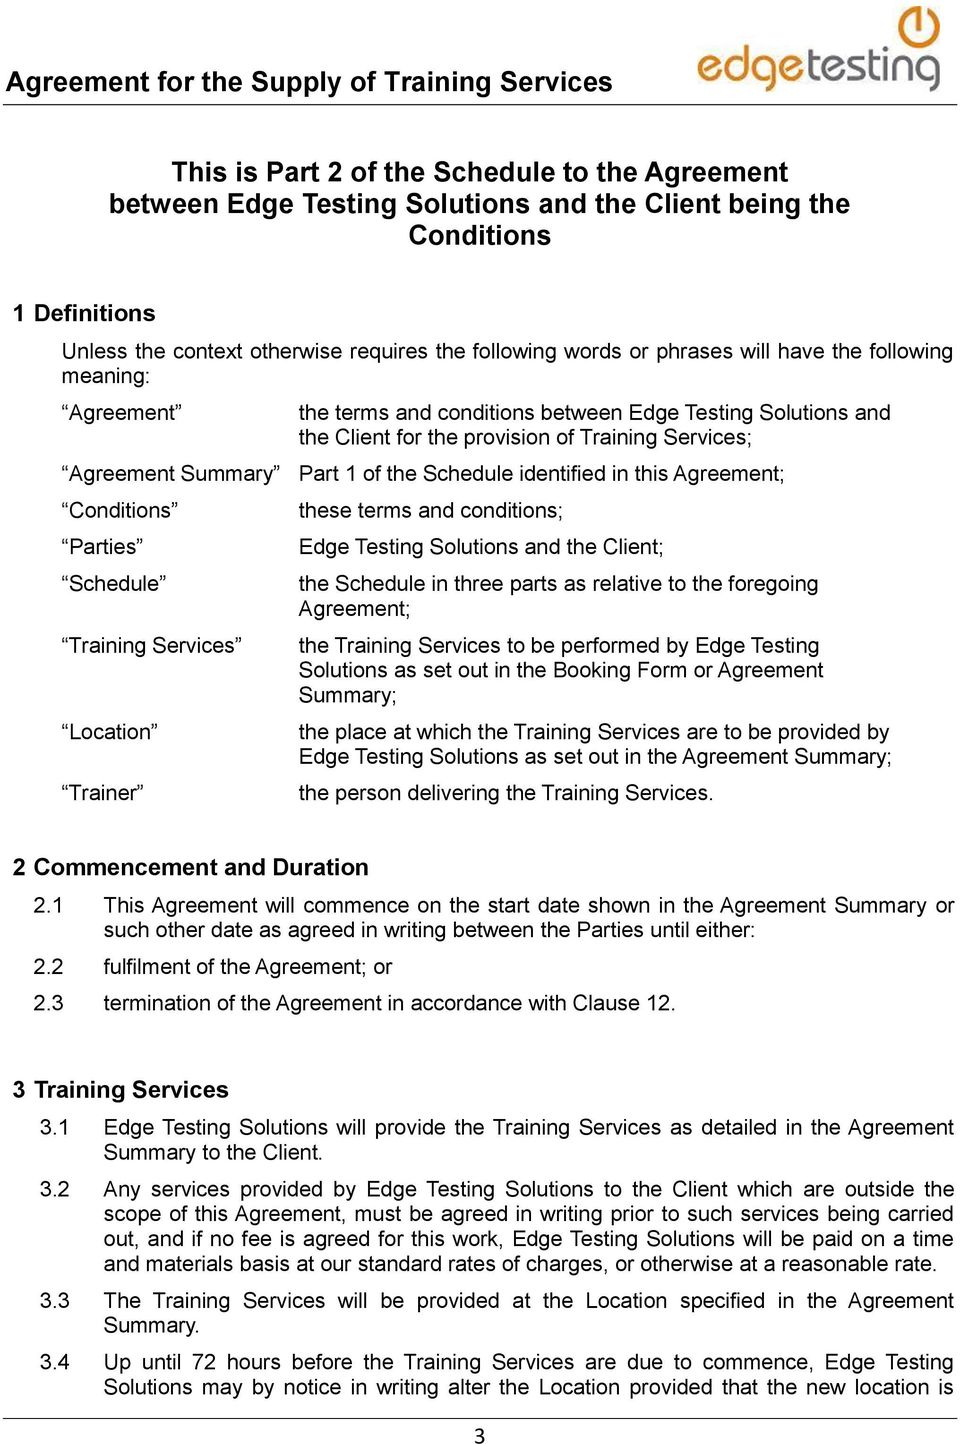 identified in this Agreement; Conditions Parties Schedule Training Services Location Trainer these terms and conditions; Edge Testing Solutions and the Client; the Schedule in three parts as relative